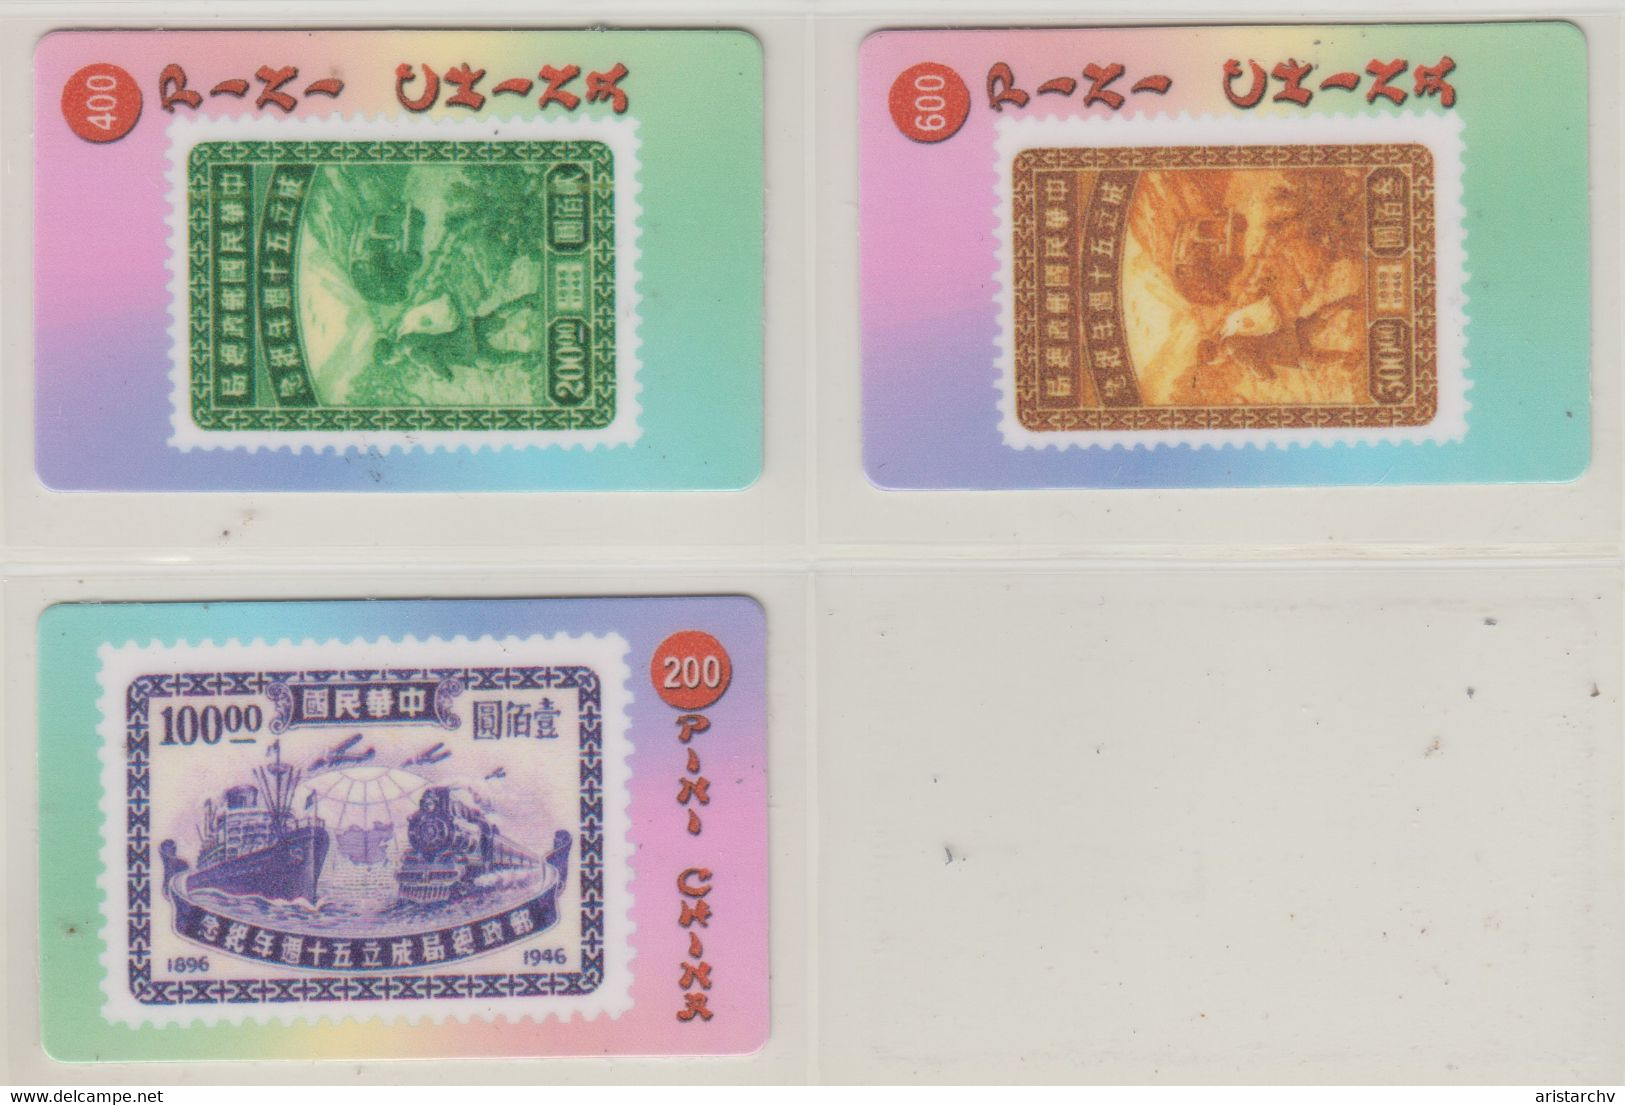 CHINA STAMPS ON PHONE CARDS SET OF 3 CARDS - Timbres & Monnaies